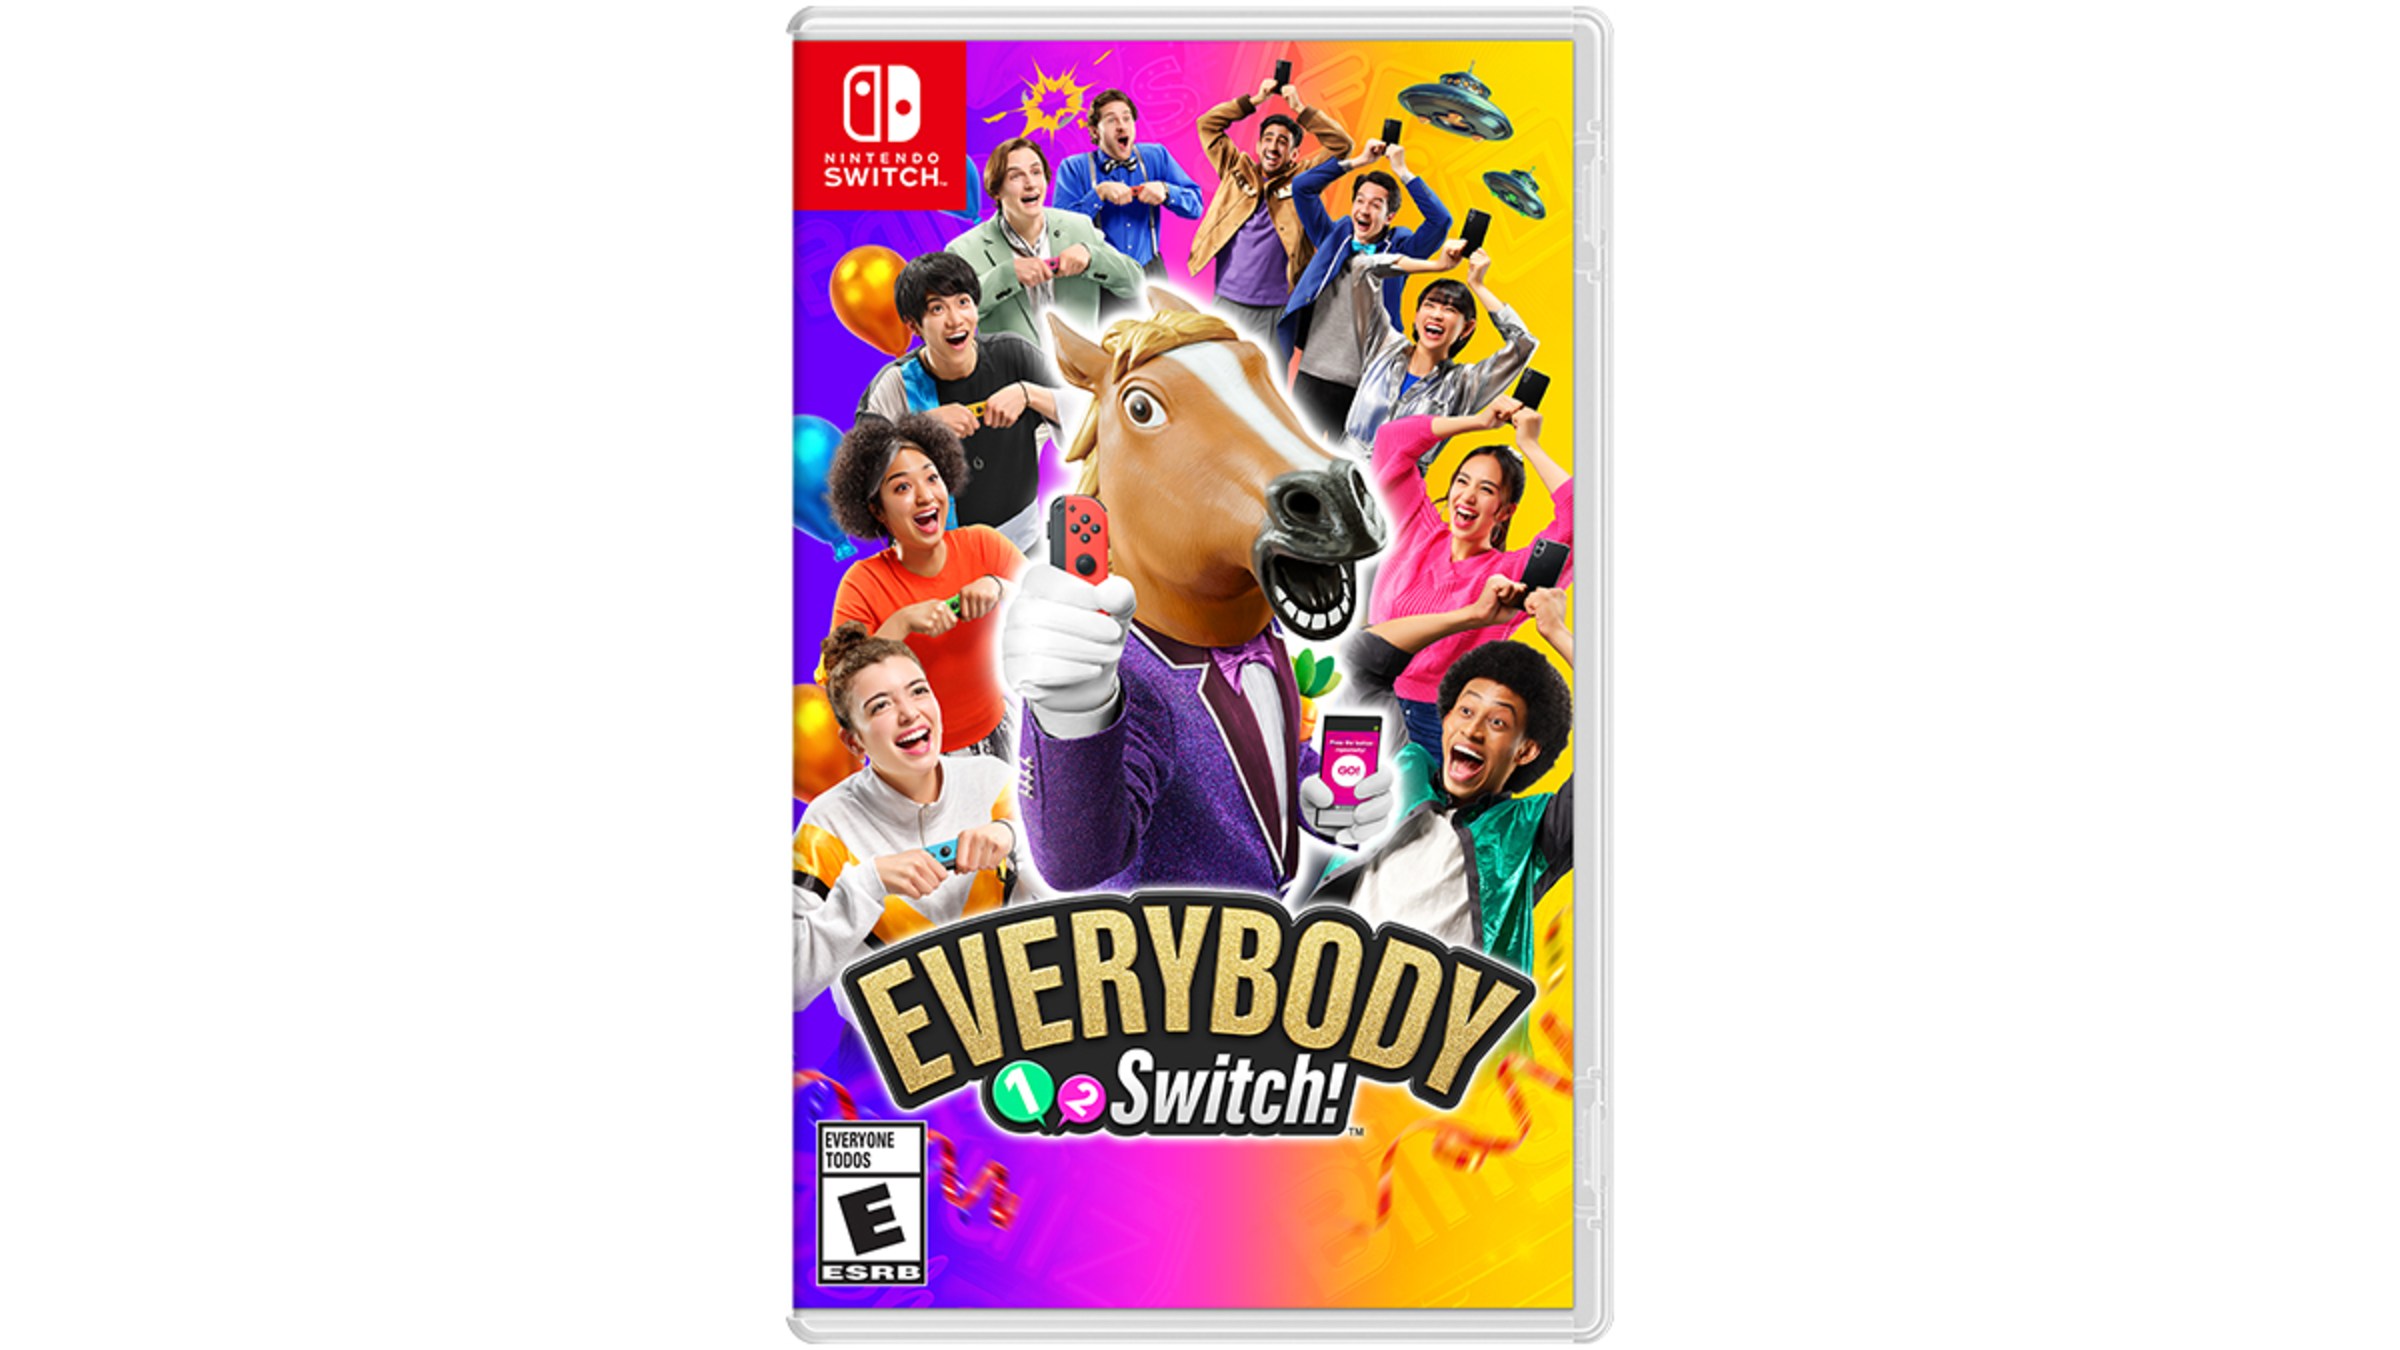 Everybody 1-2 Switch Includes Option For Uploading Pictures